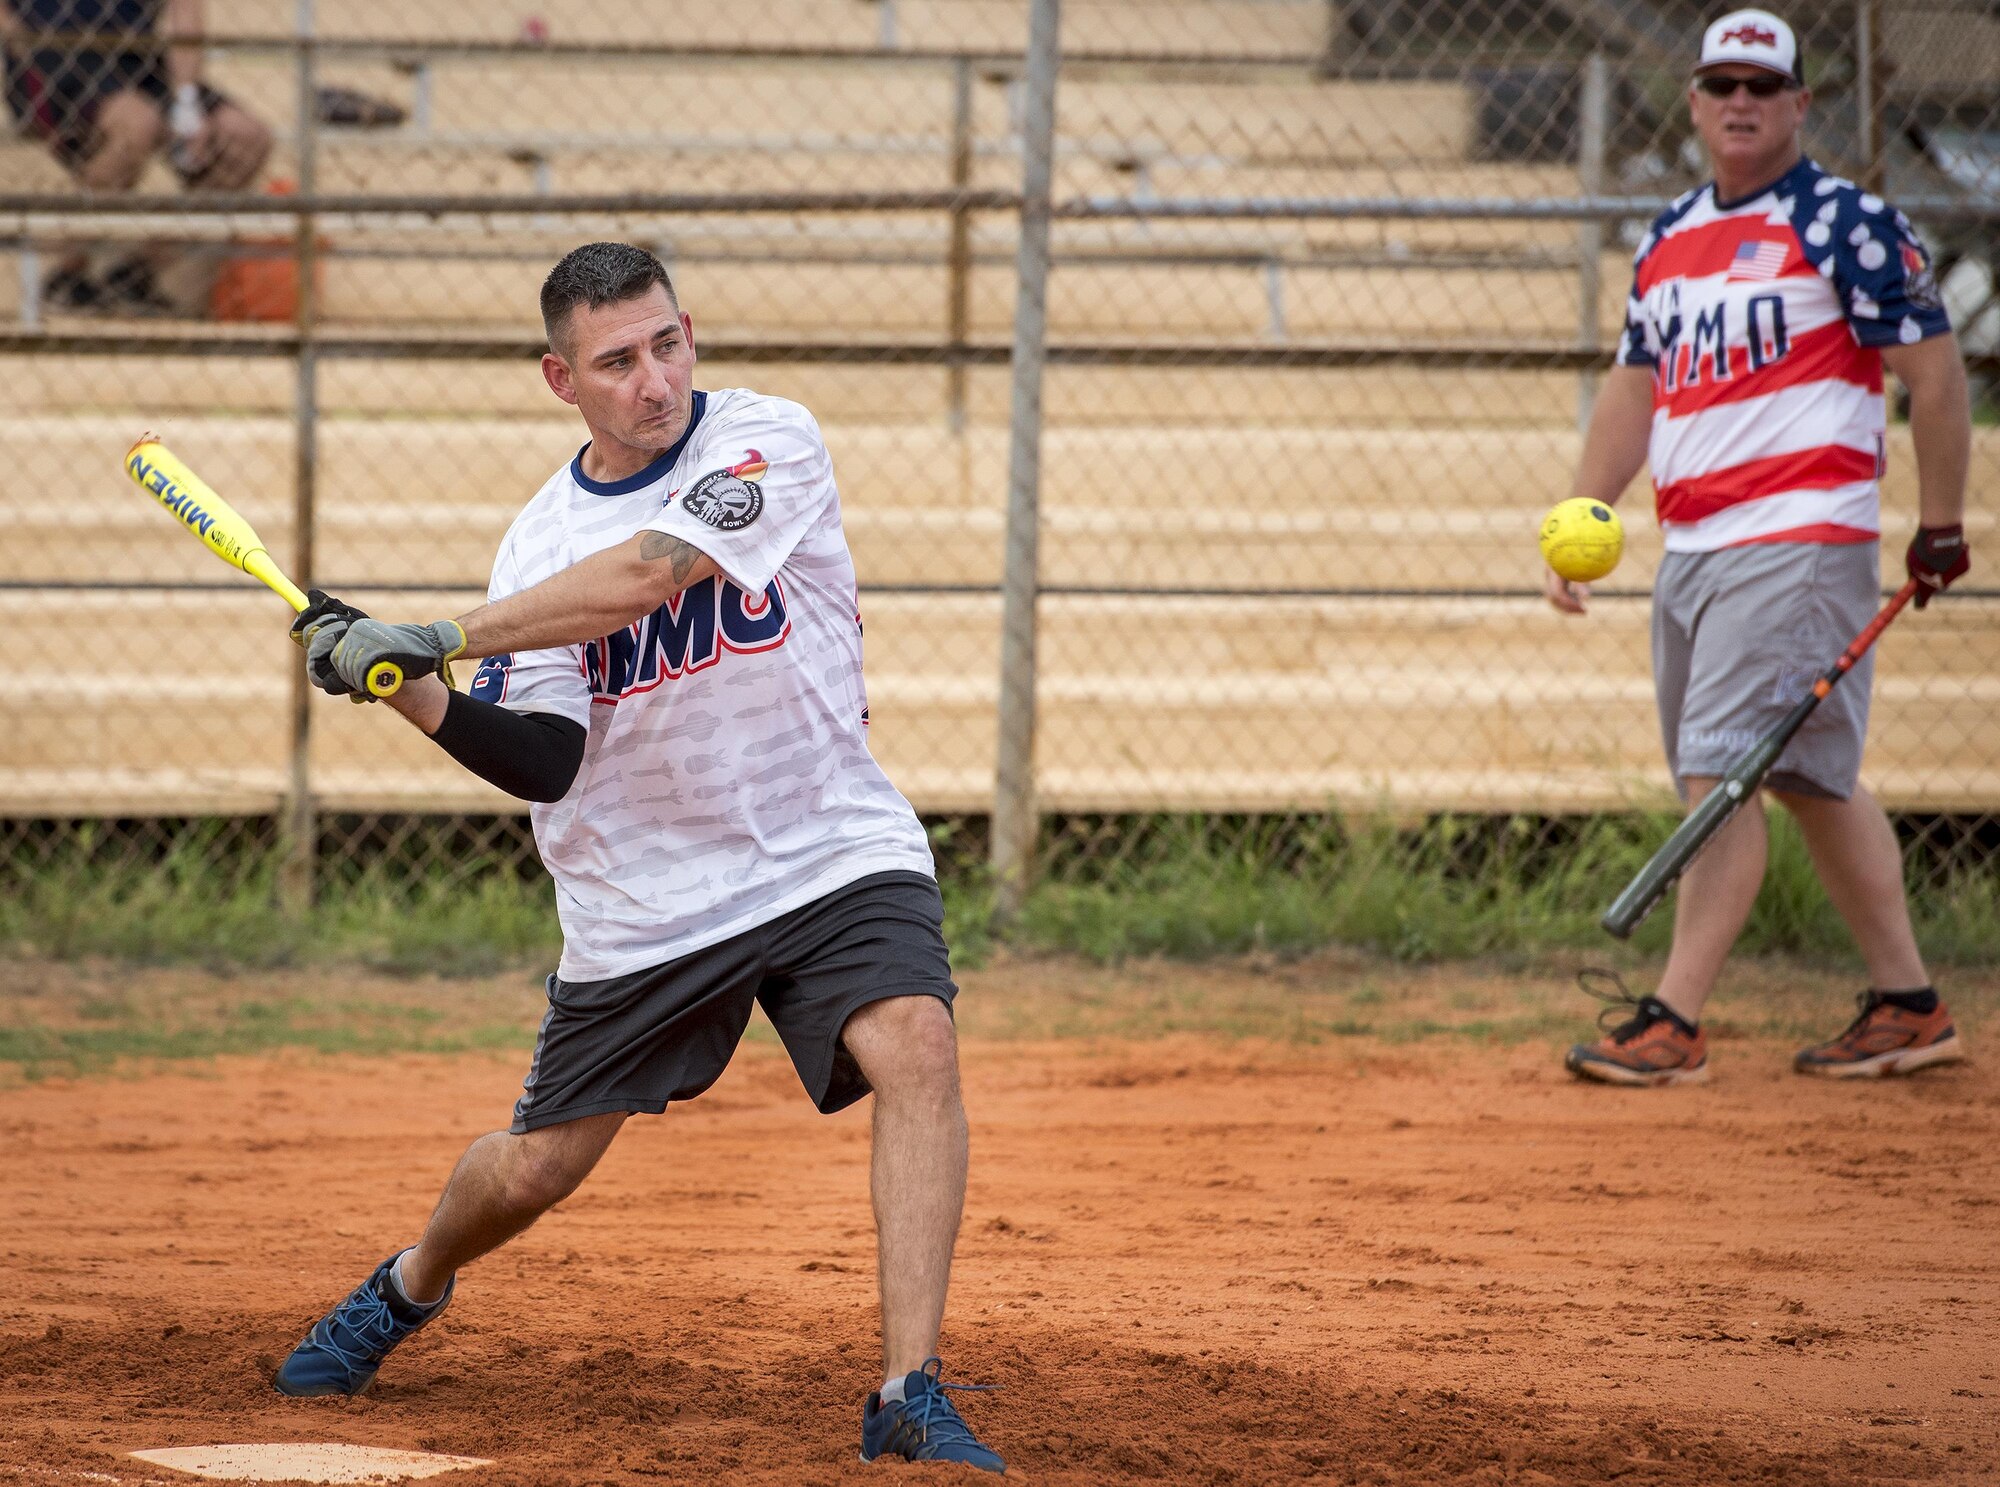 Jeff Hird, 96th Maintenance Squadron, swings away during an intramural softball game against the 359th Training Squadron team July 17 at Eglin Air Force Base, Fla.  The league-leading Maintainers pounded the training squadron 10-5 to improve to 9-1 on the season.  (U.S. Air Force photo/Samuel King Jr.)